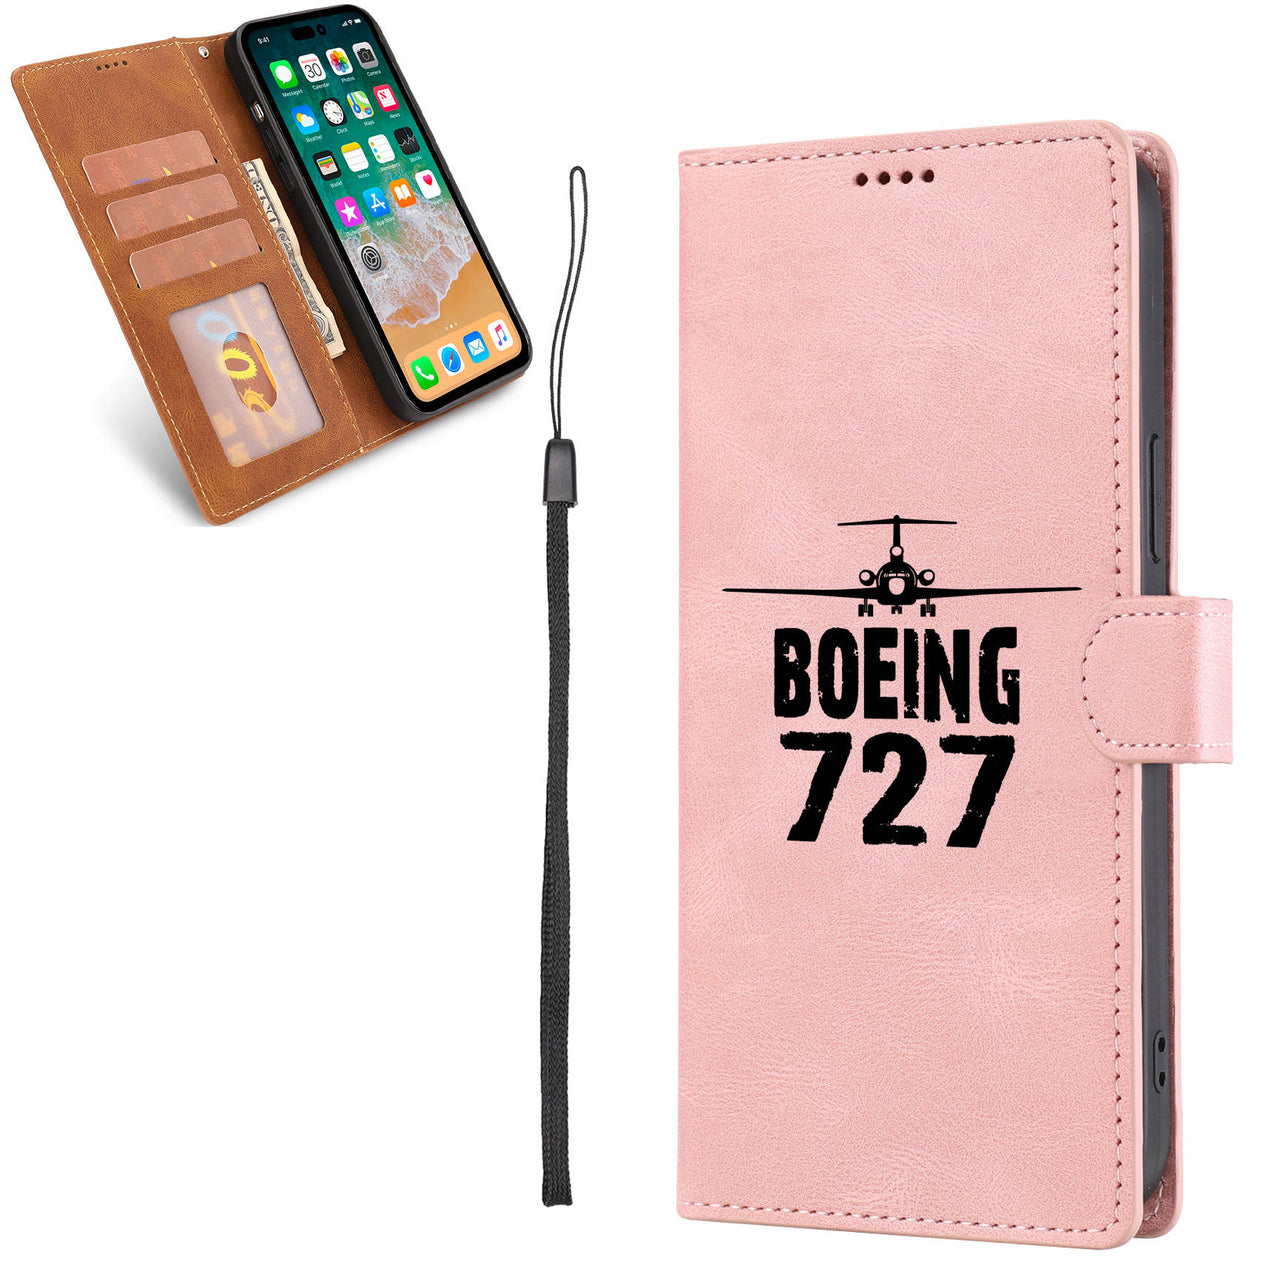 Boeing 727 & Plane Leather Samsung A Cases